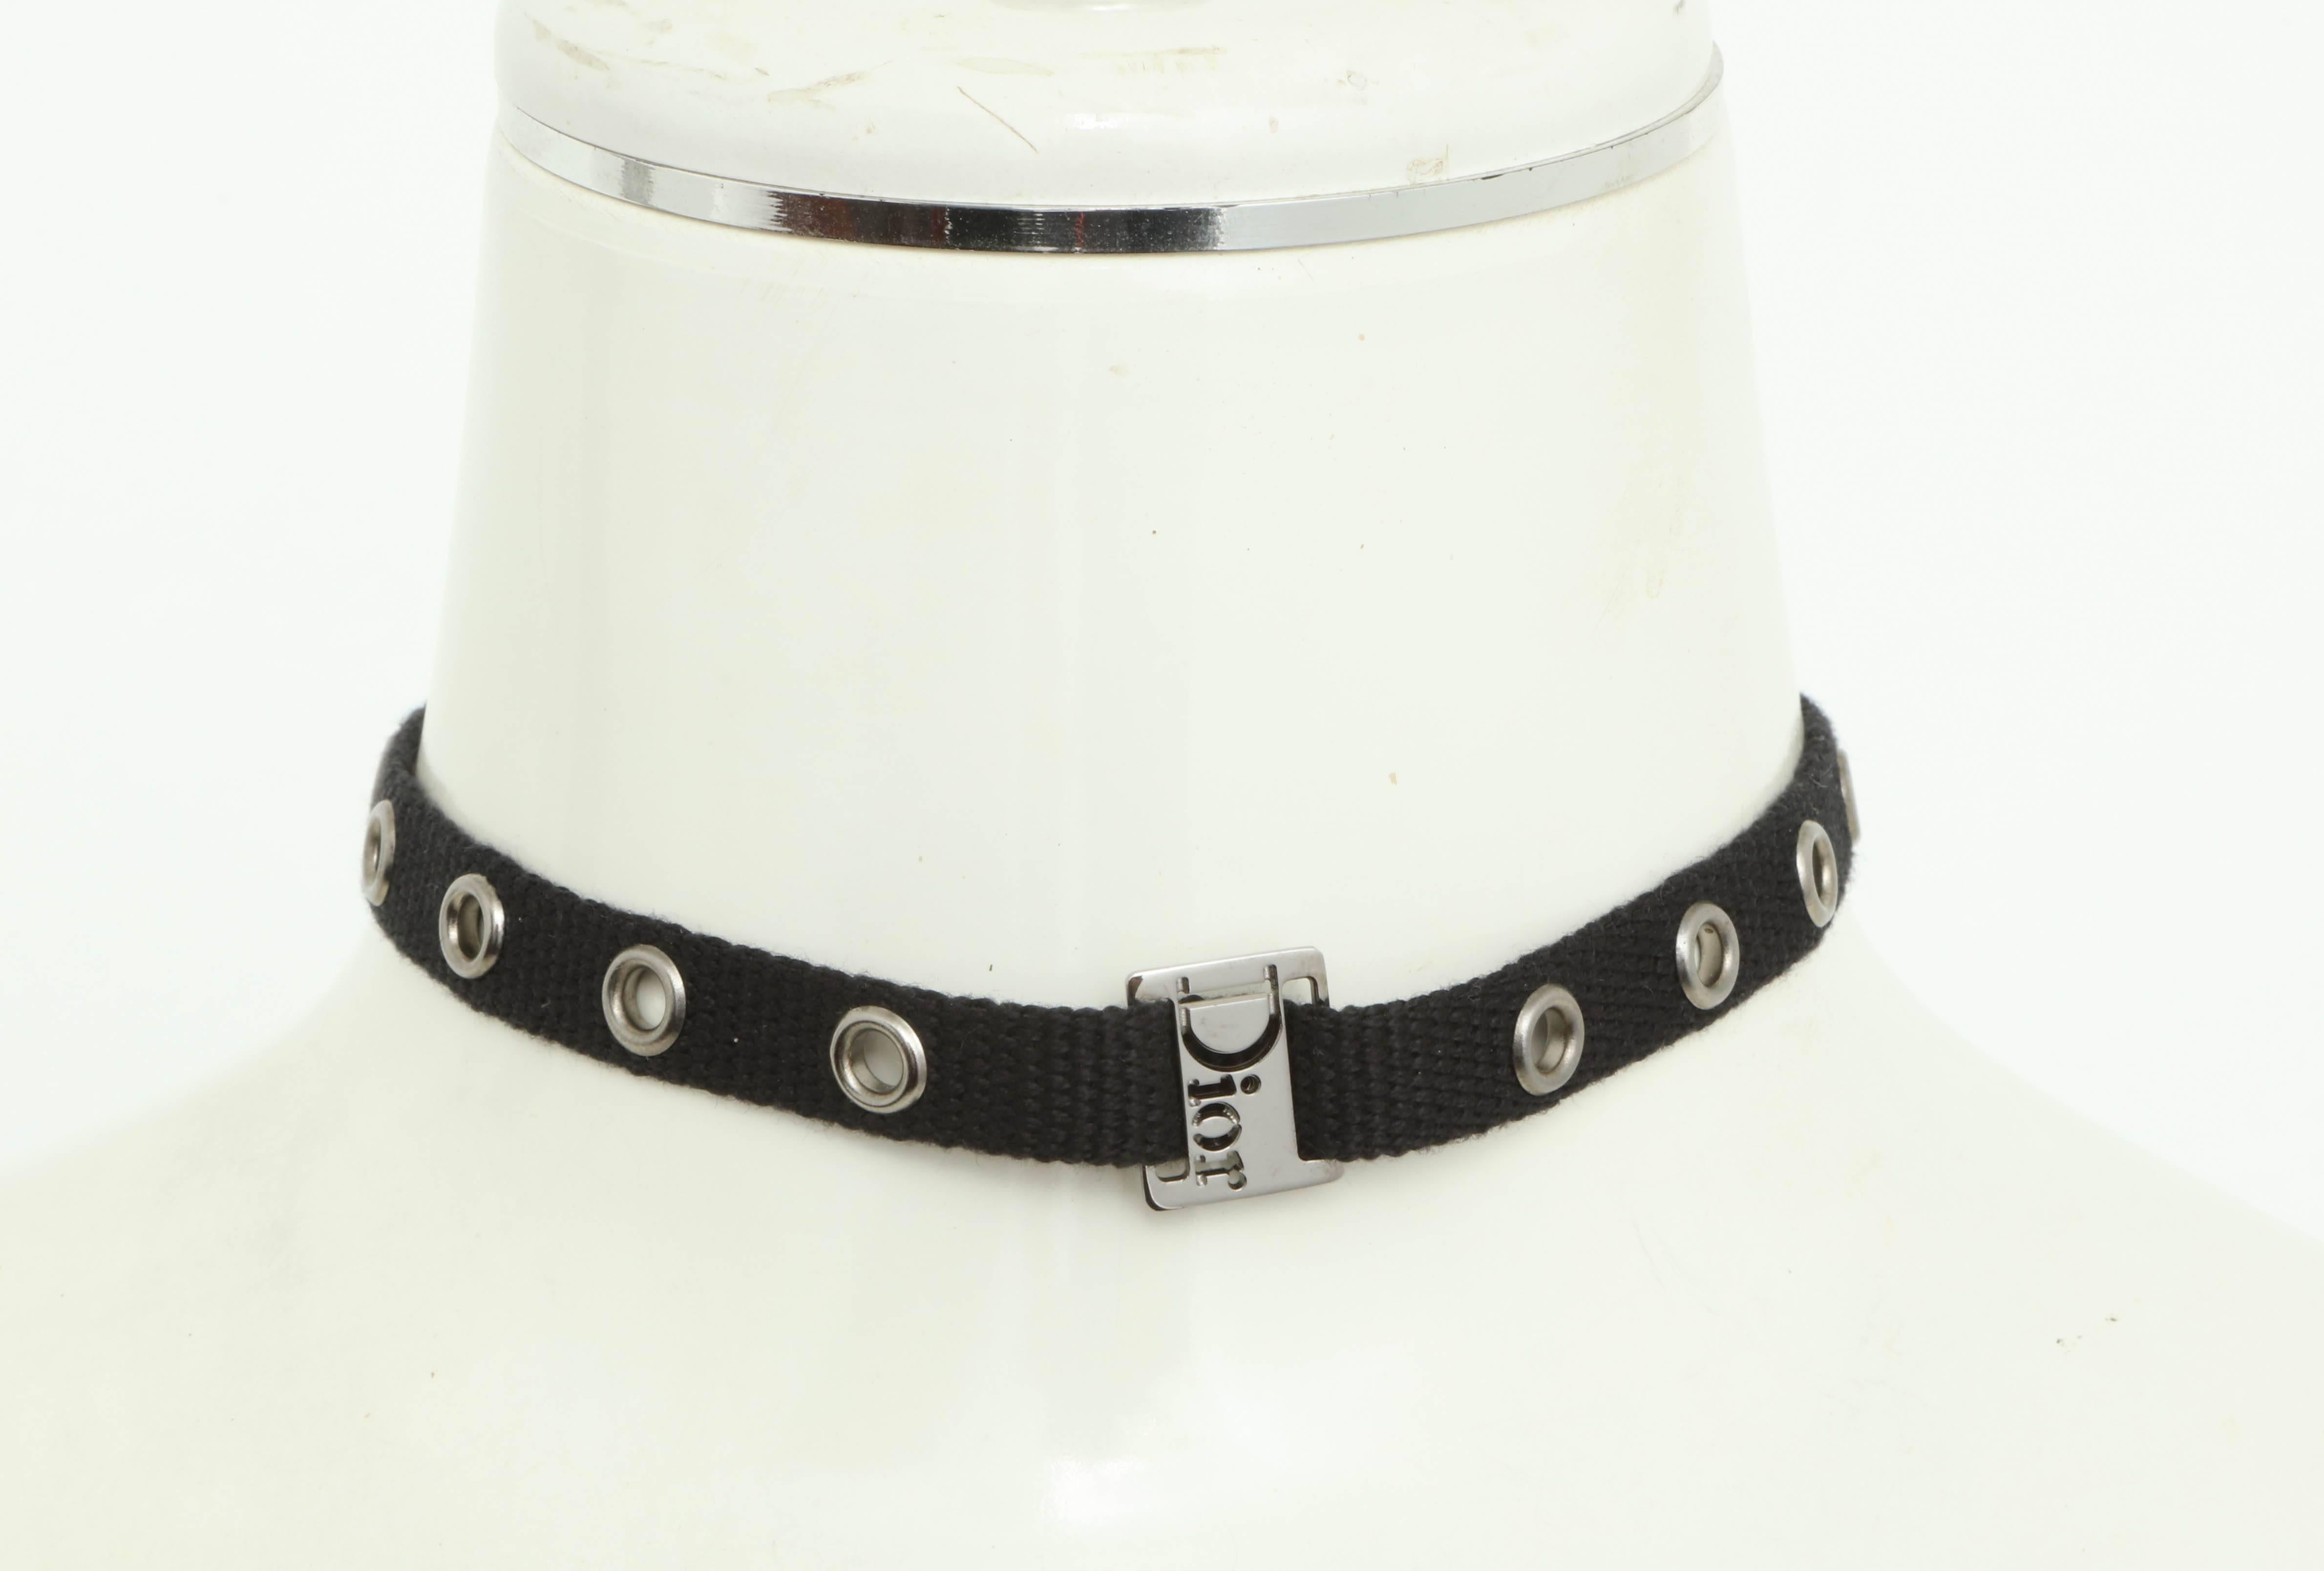 Beautiful Dior by John Galliano black choker with silver hardware.

Length: Adjustable 12 to 14 inches